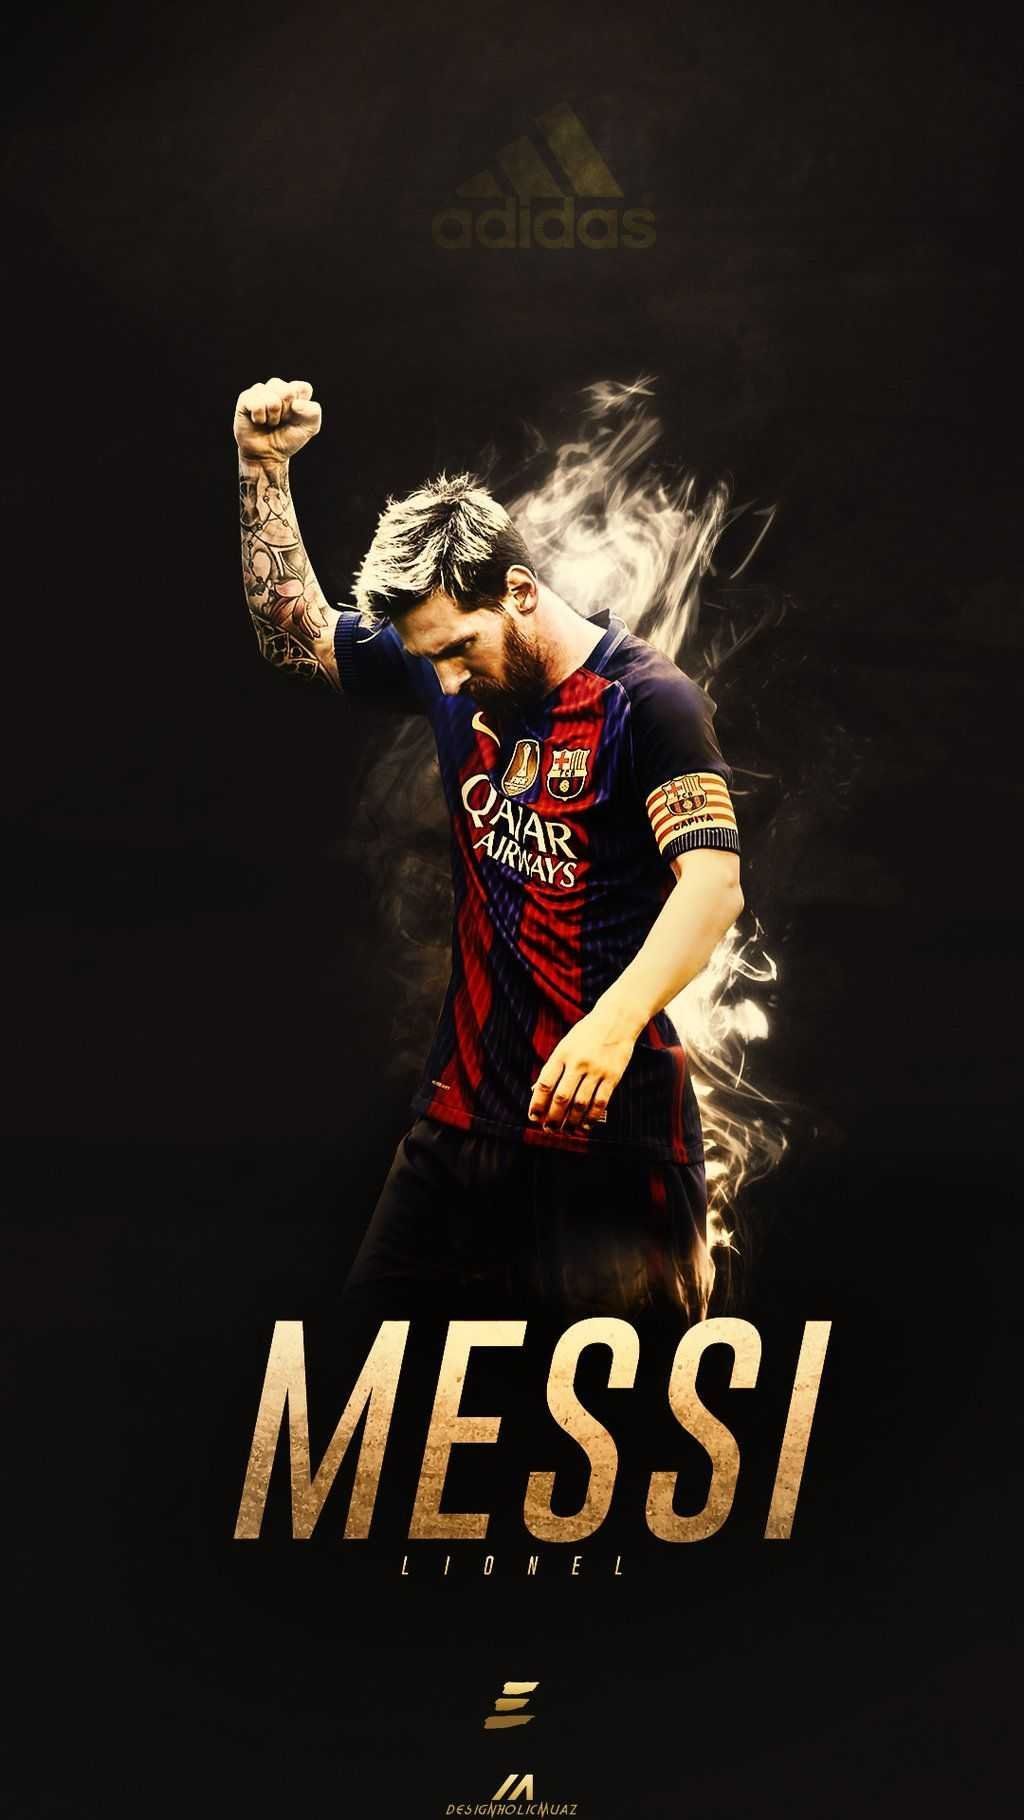 Lionel Messi wallpaper for iPhone with high-resolution 1080x1920 pixel. You can use this wallpaper for your iPhone 5, 6, 7, 8, X, XS, XR backgrounds, Mobile Screensaver, or iPad Lock Screen - Messi